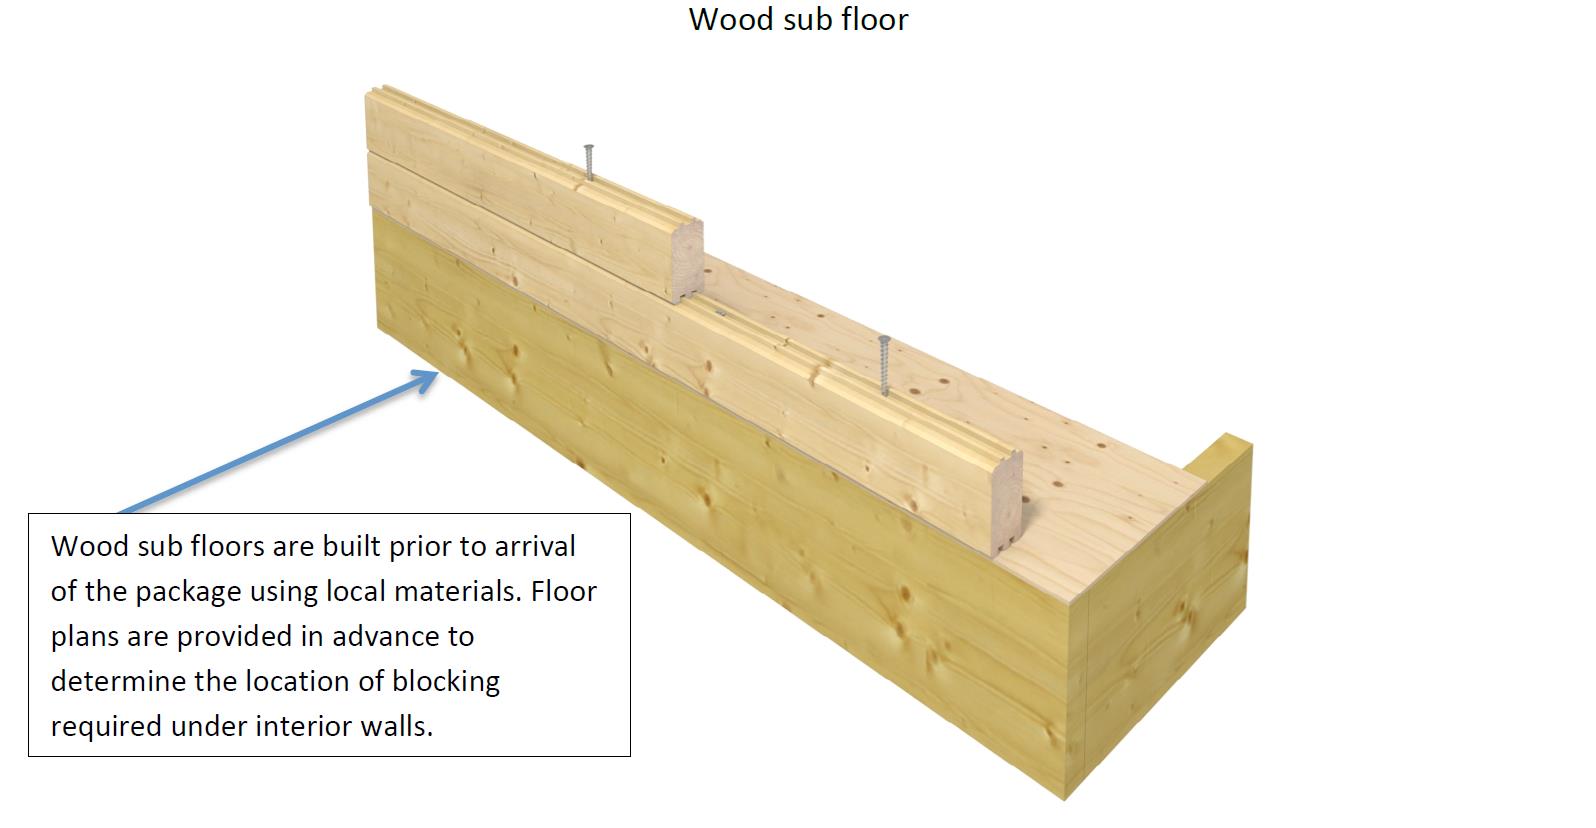 Wood sub floor - Mounting first two rows of wall logs to foundation. Wood sub floors are built prior to arrival of the package using local materials. Floor plans are provided in advance to determine the location of blocking required under interior walls. Do it ypourself building kits. EZ Log Structures.